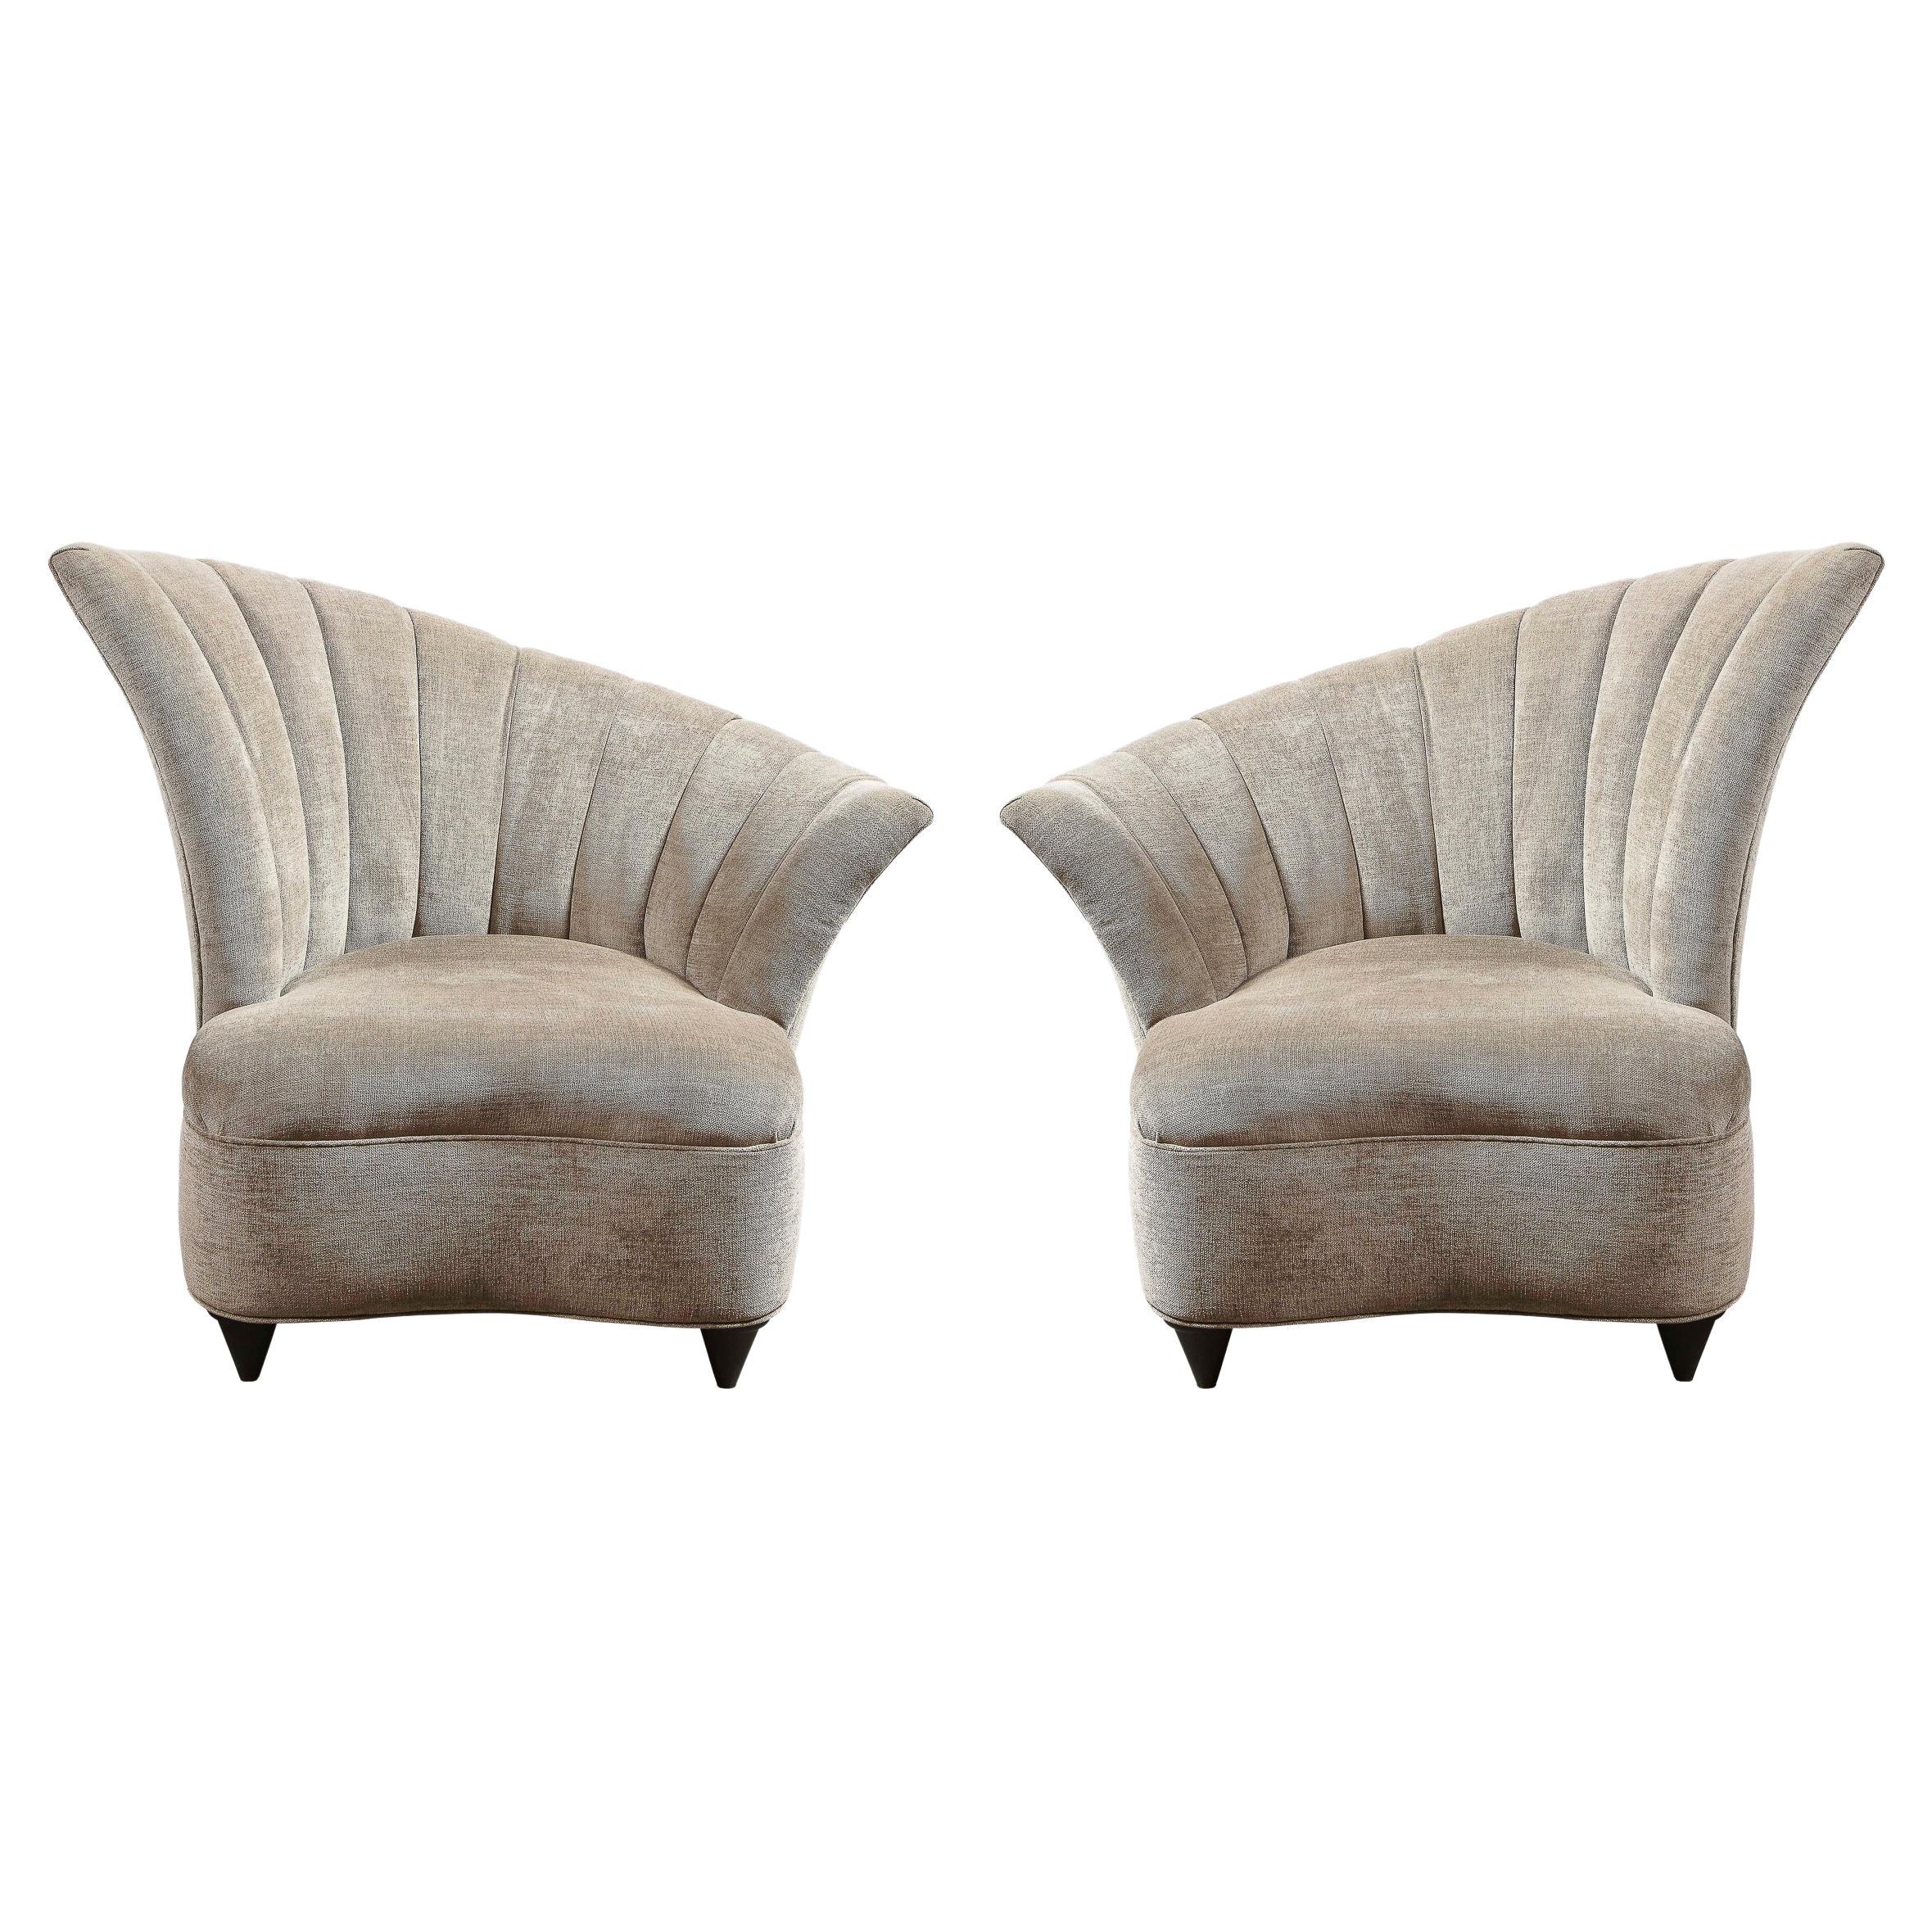 Pair of Hollywood Asymmetrical Tufted Hollywood Chairs in Smoked Topaz Velvet For Sale